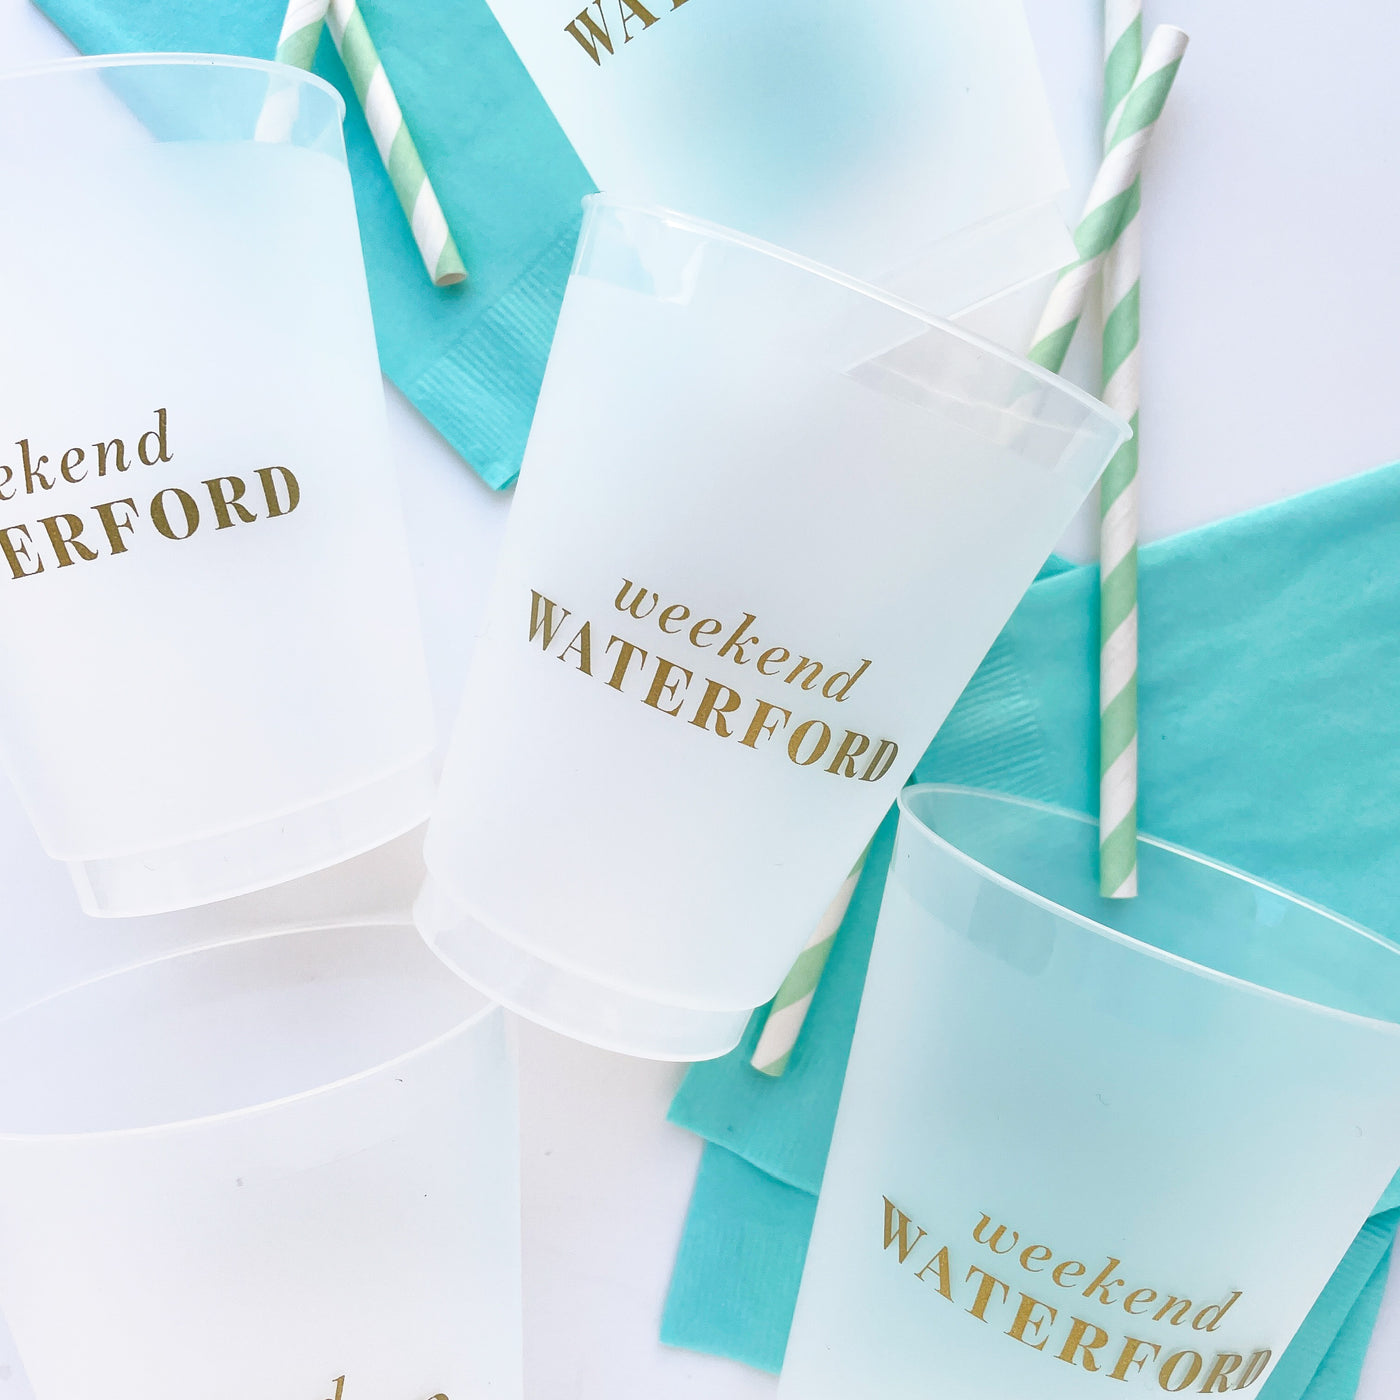 Weekend Waterford Cups - Stack of 10